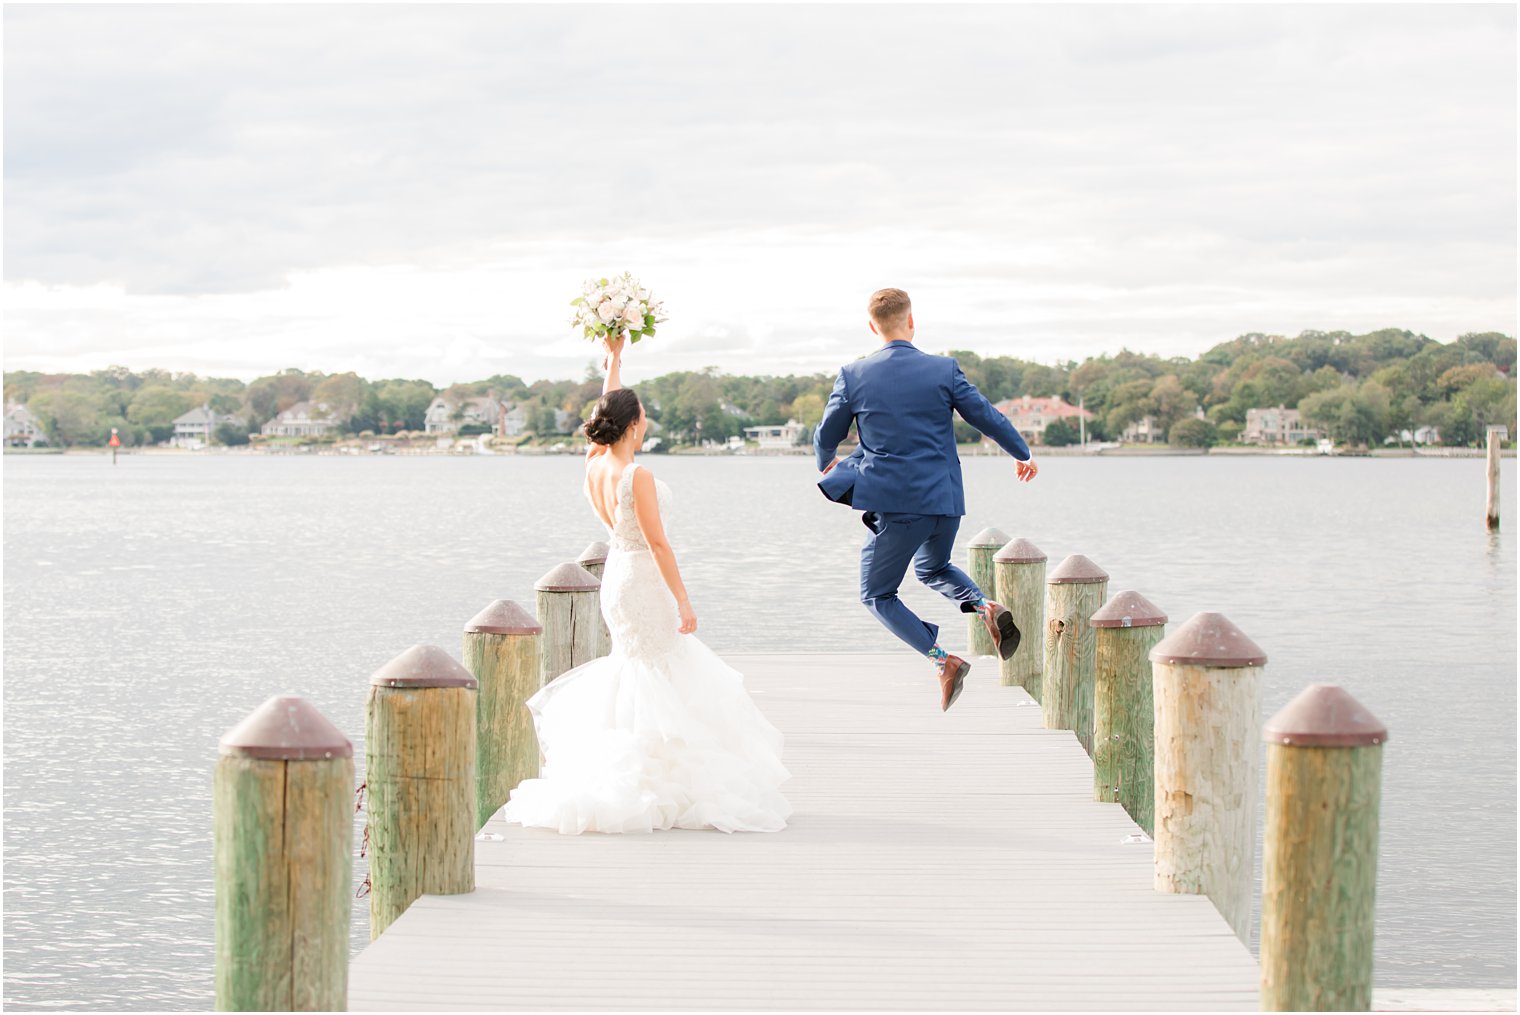 groom jumps with bride during wedding portraits in New Jersey